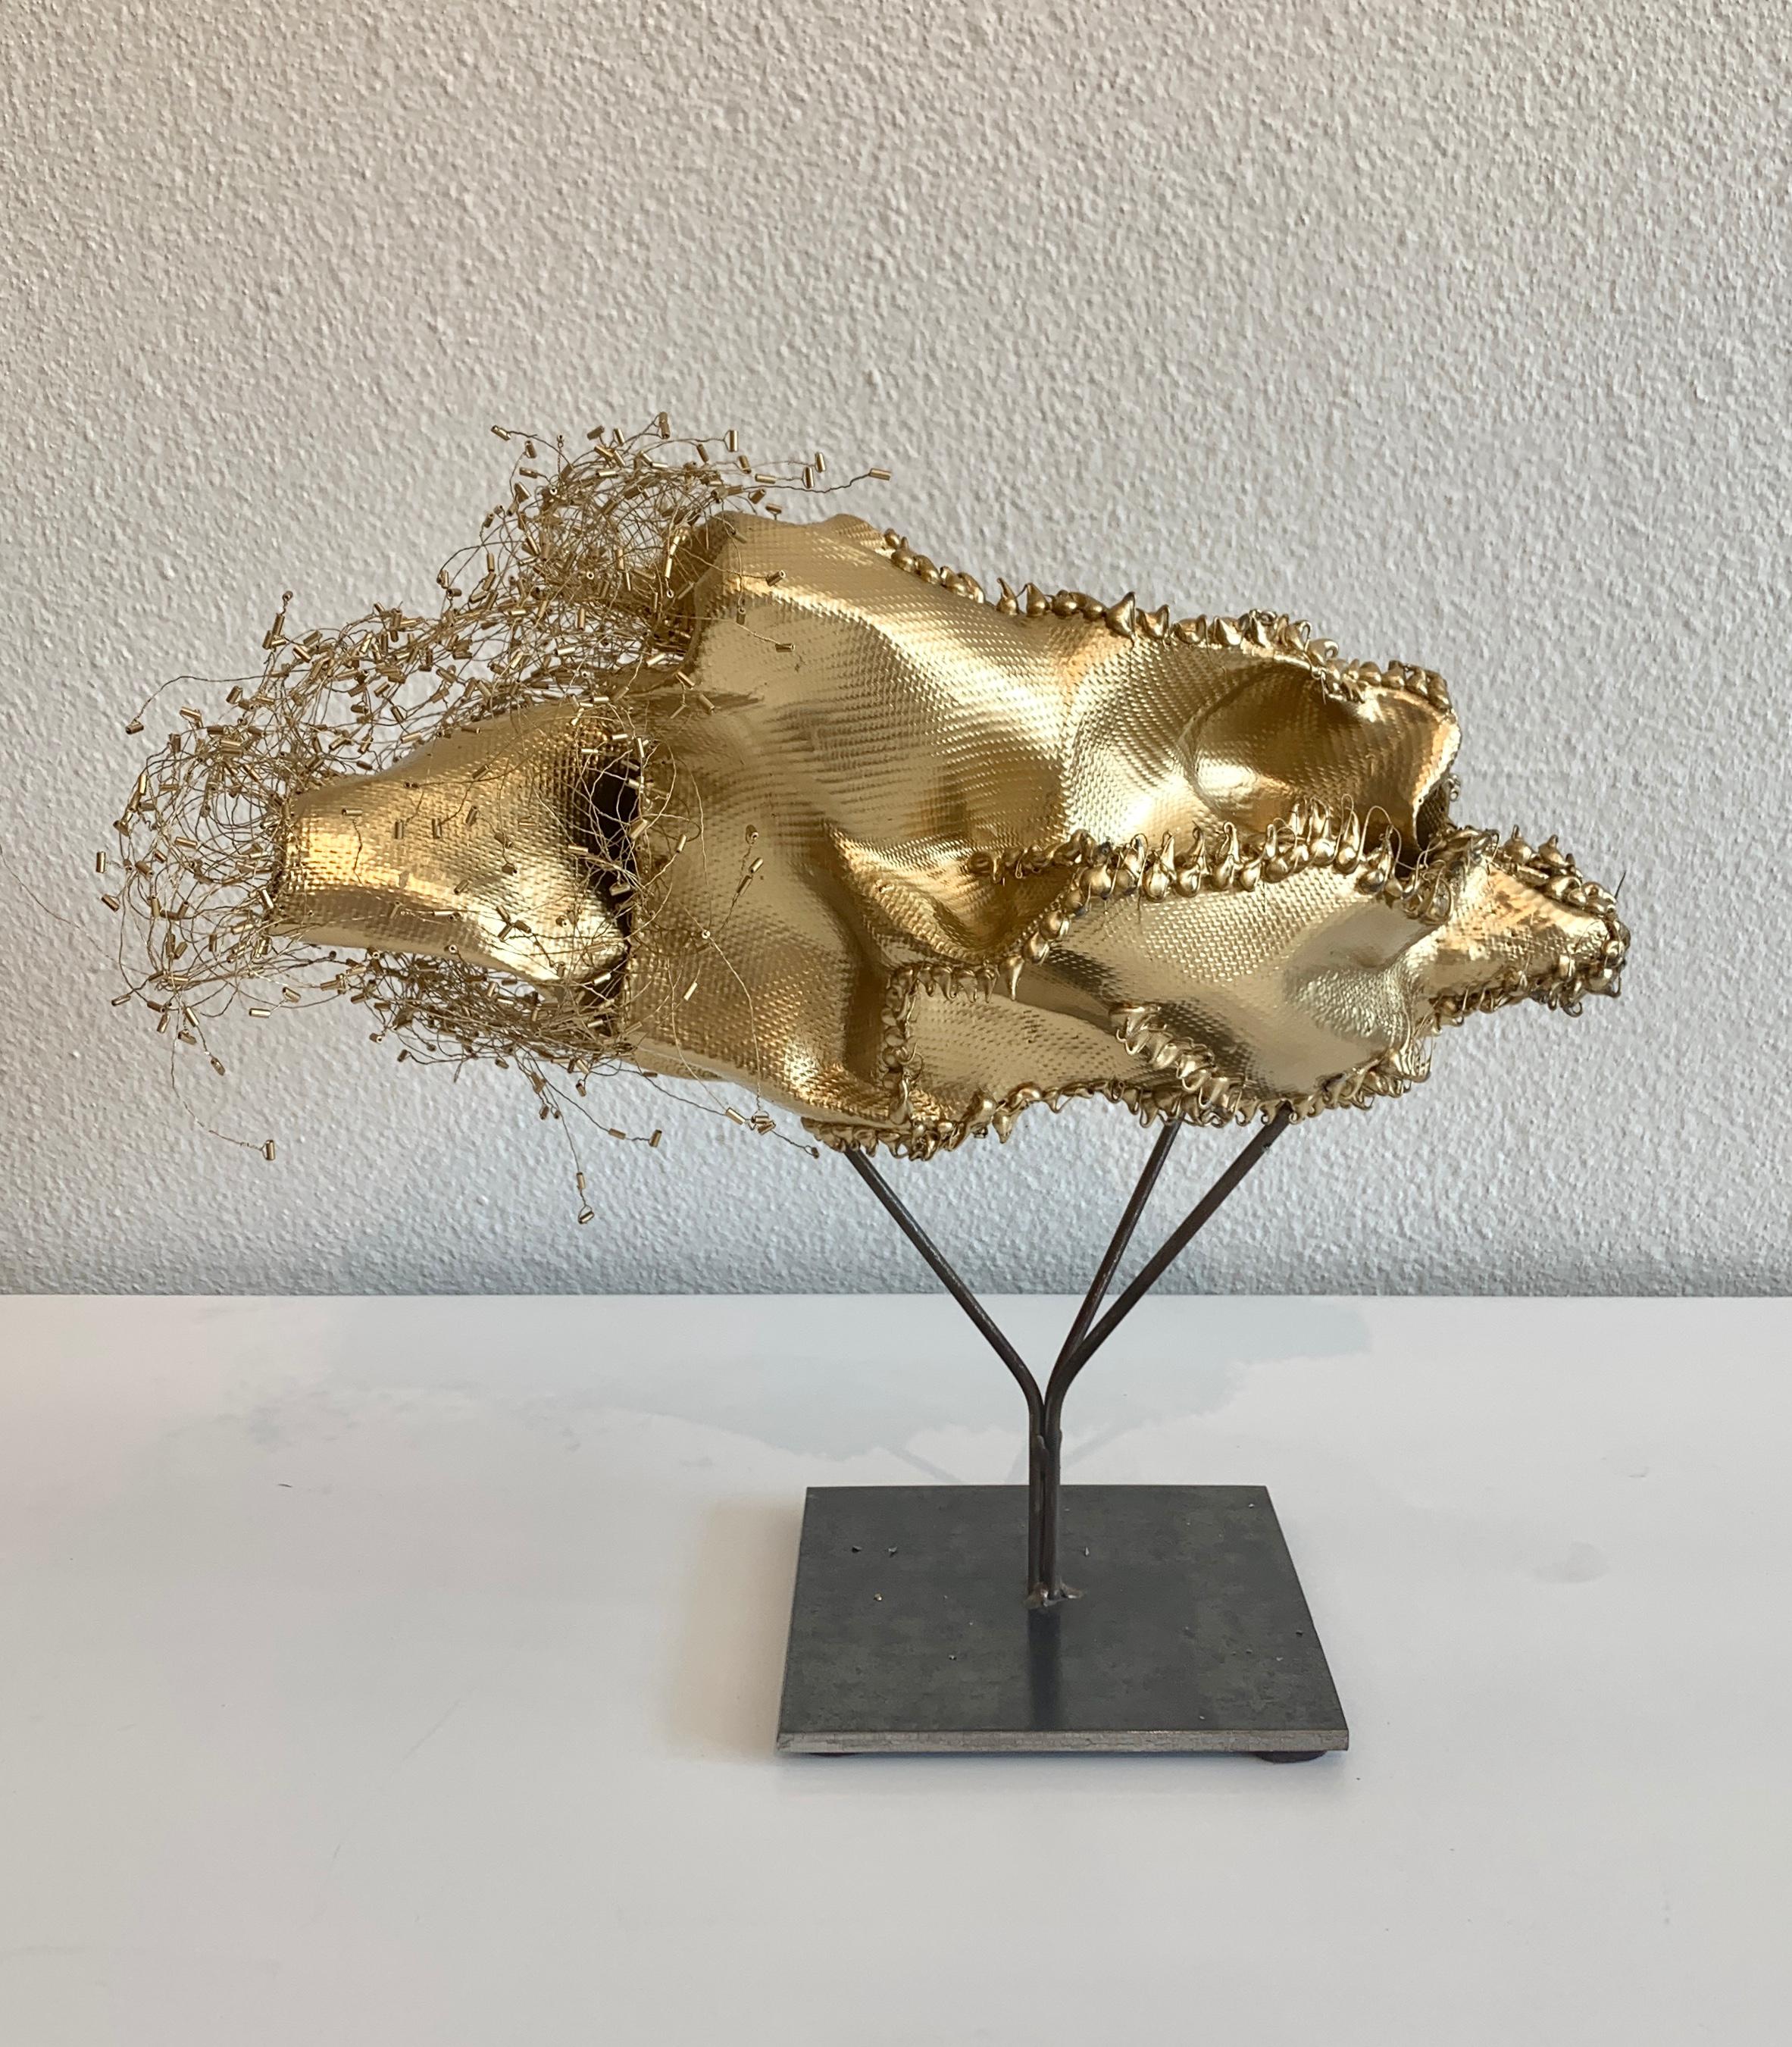 The Gathering Gilded, Atticus Adams Gold Metal Mesh Standing Sculpture For Sale 4